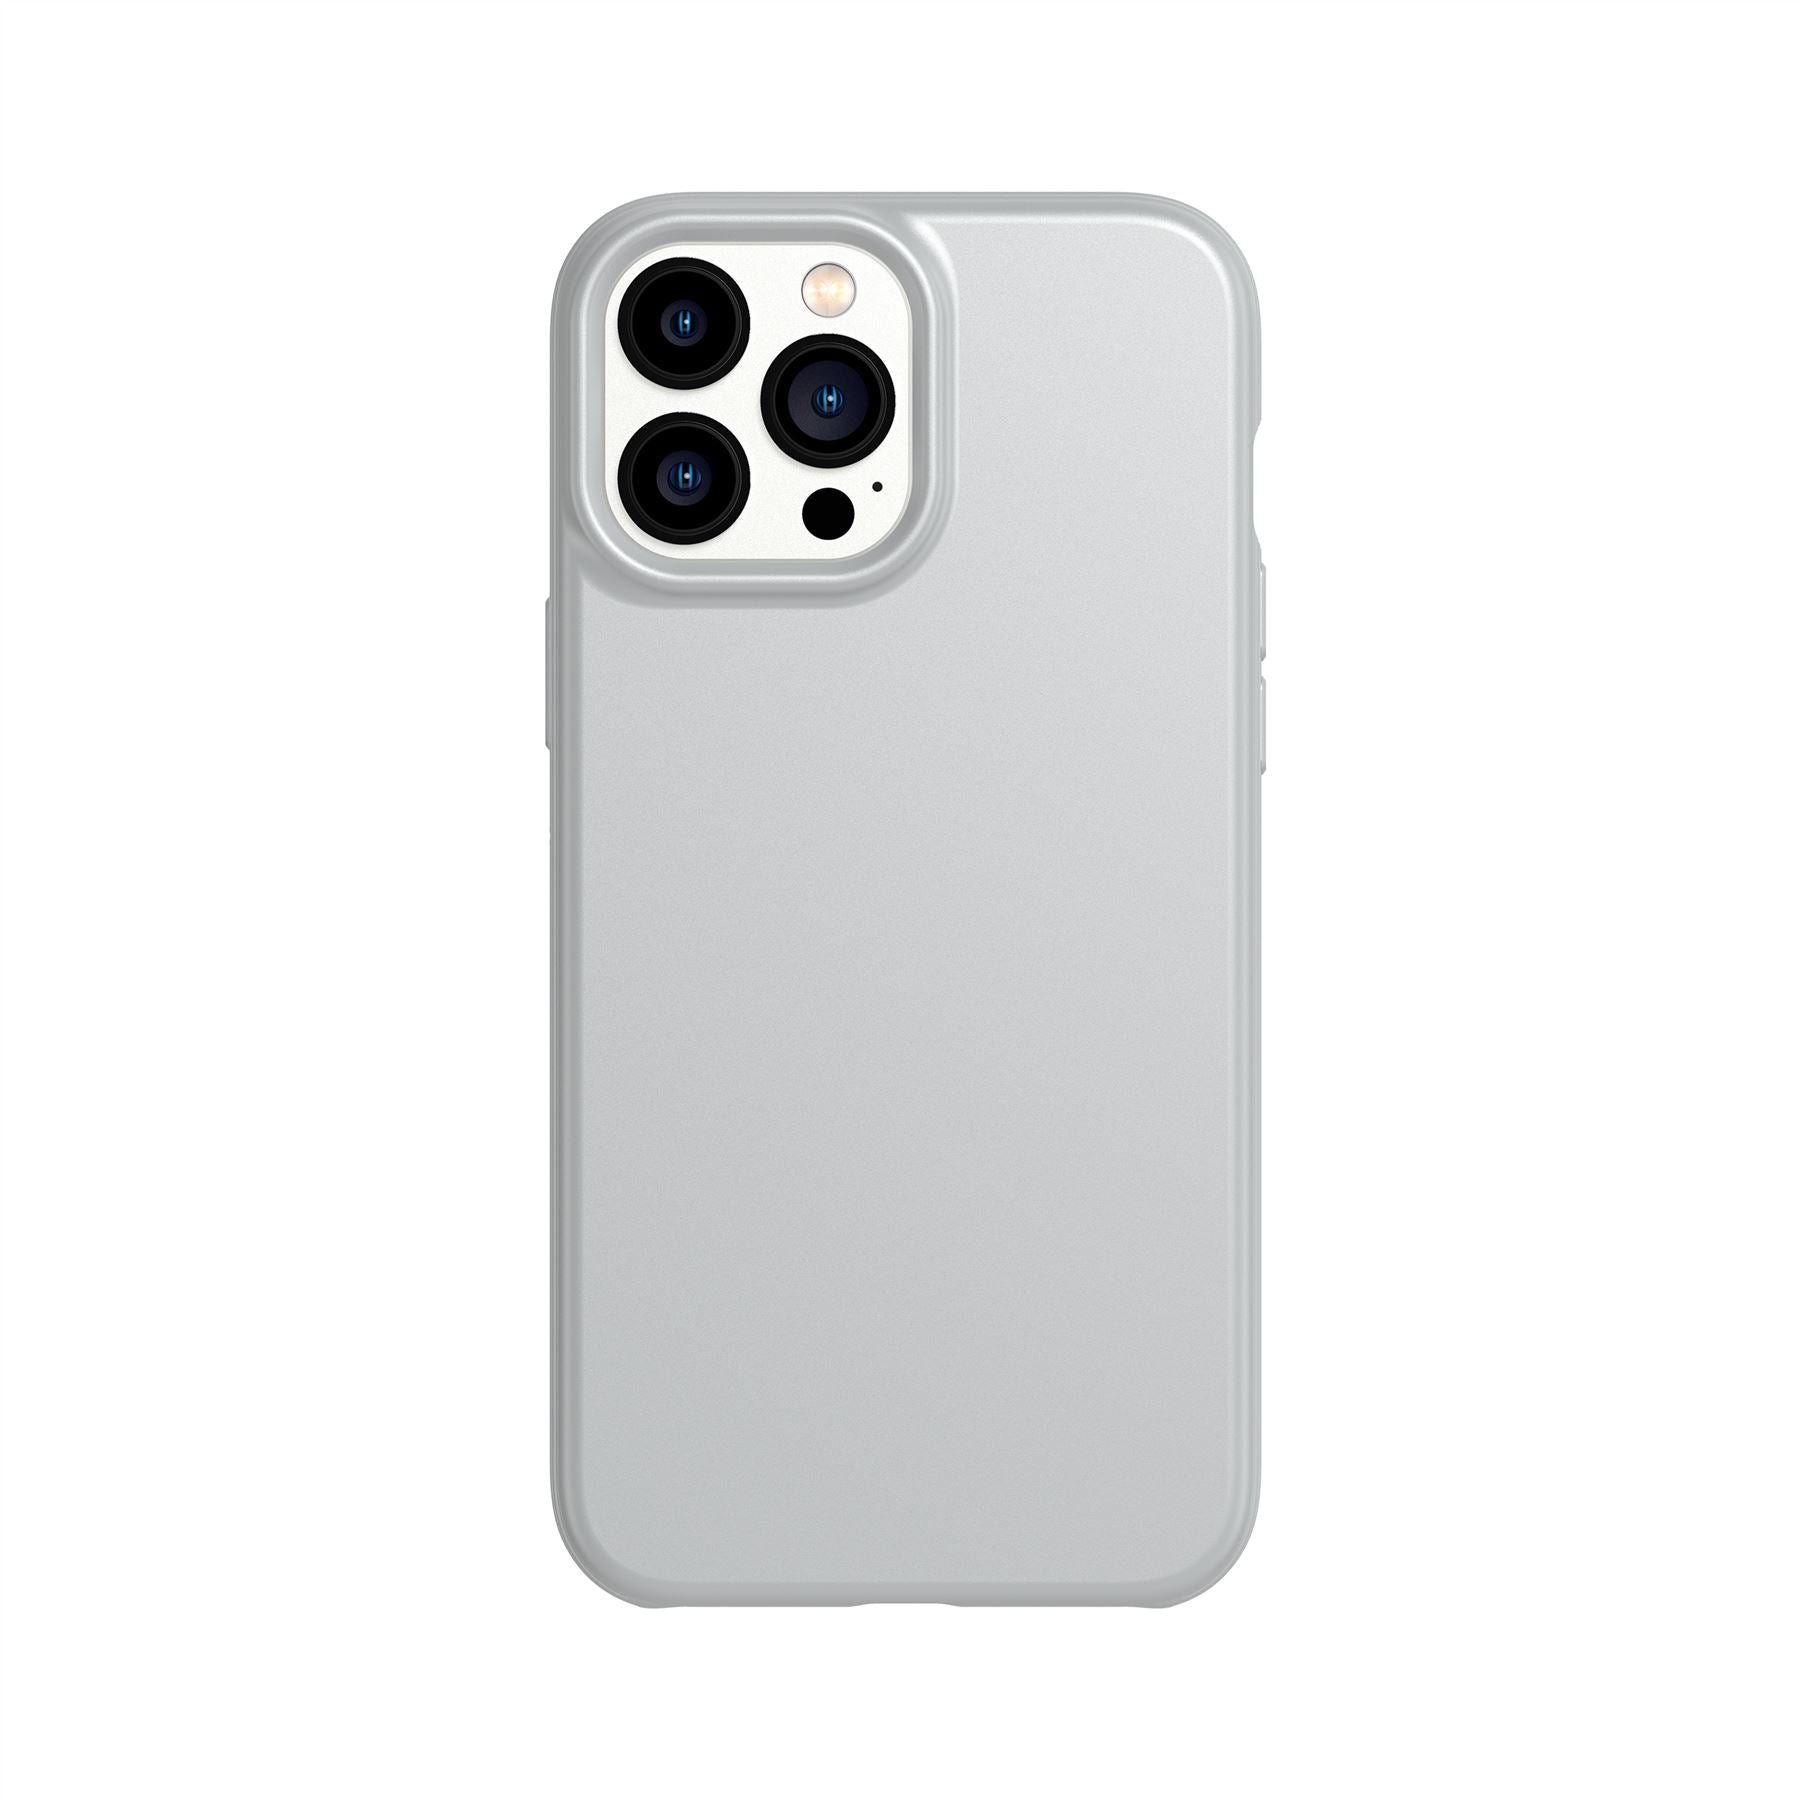 CRYSTAL-X for iPhone 11/Pro/Max, Scratch-resistant